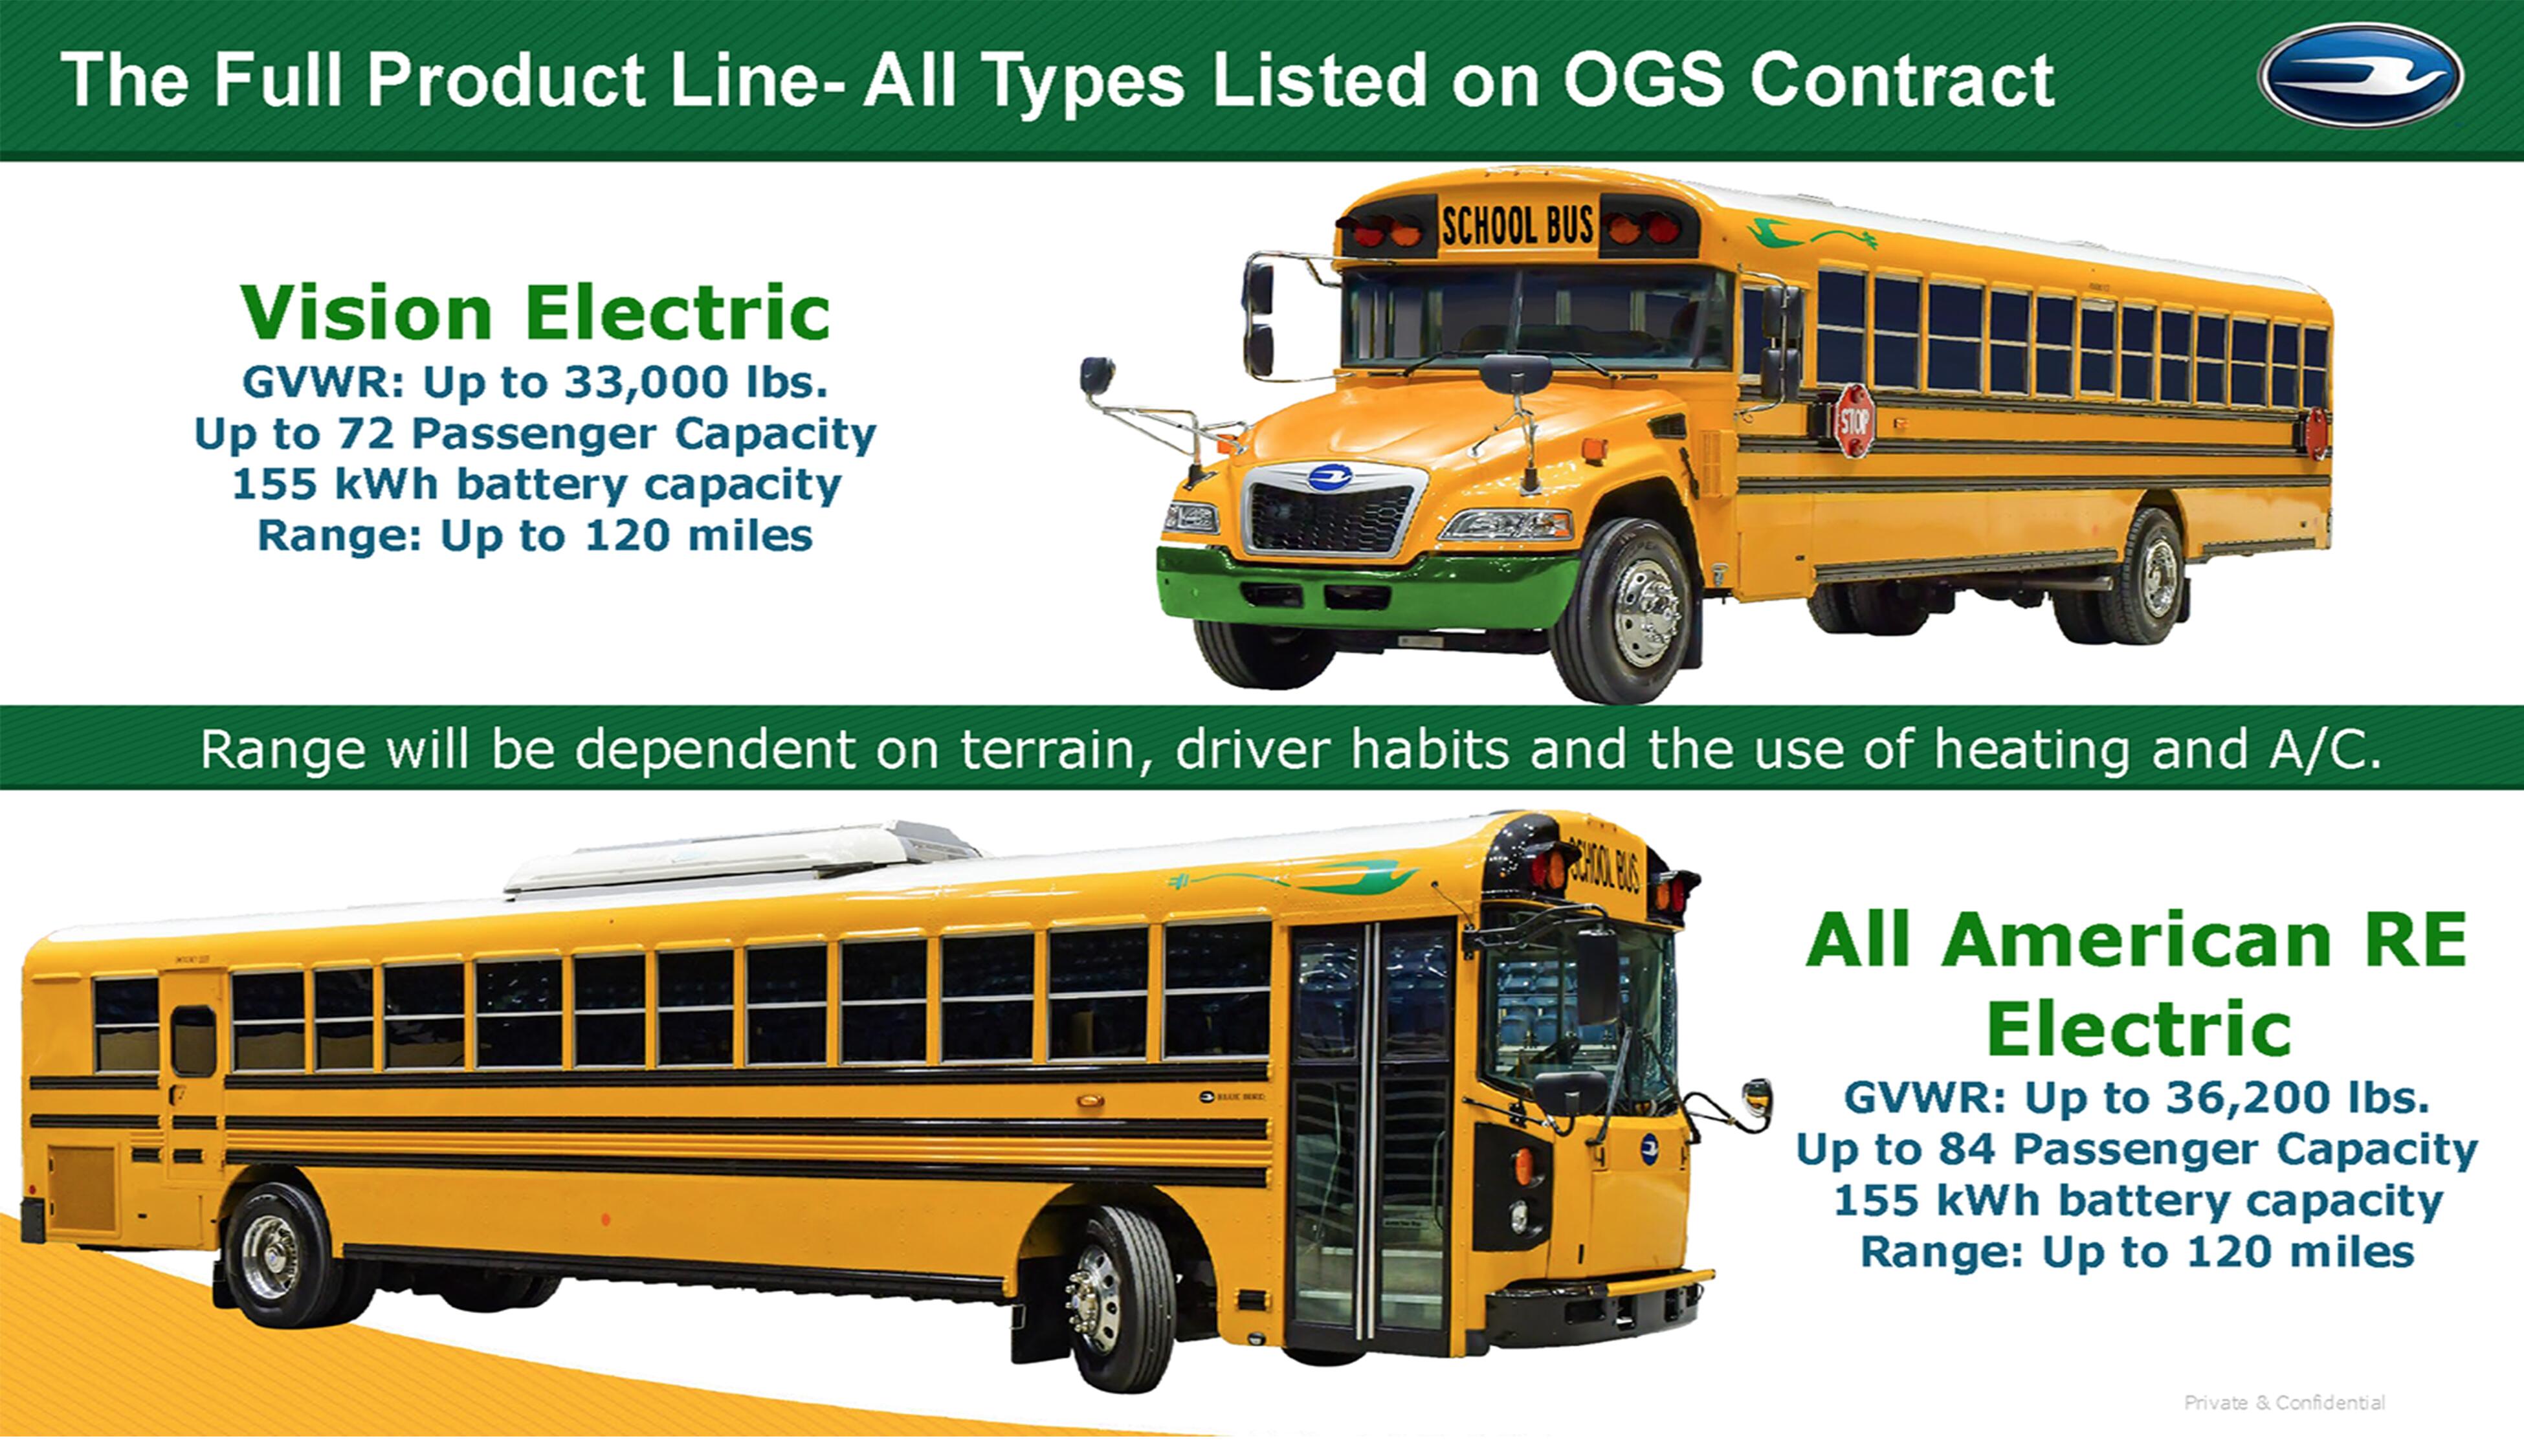 Types of Electric Buses Offered